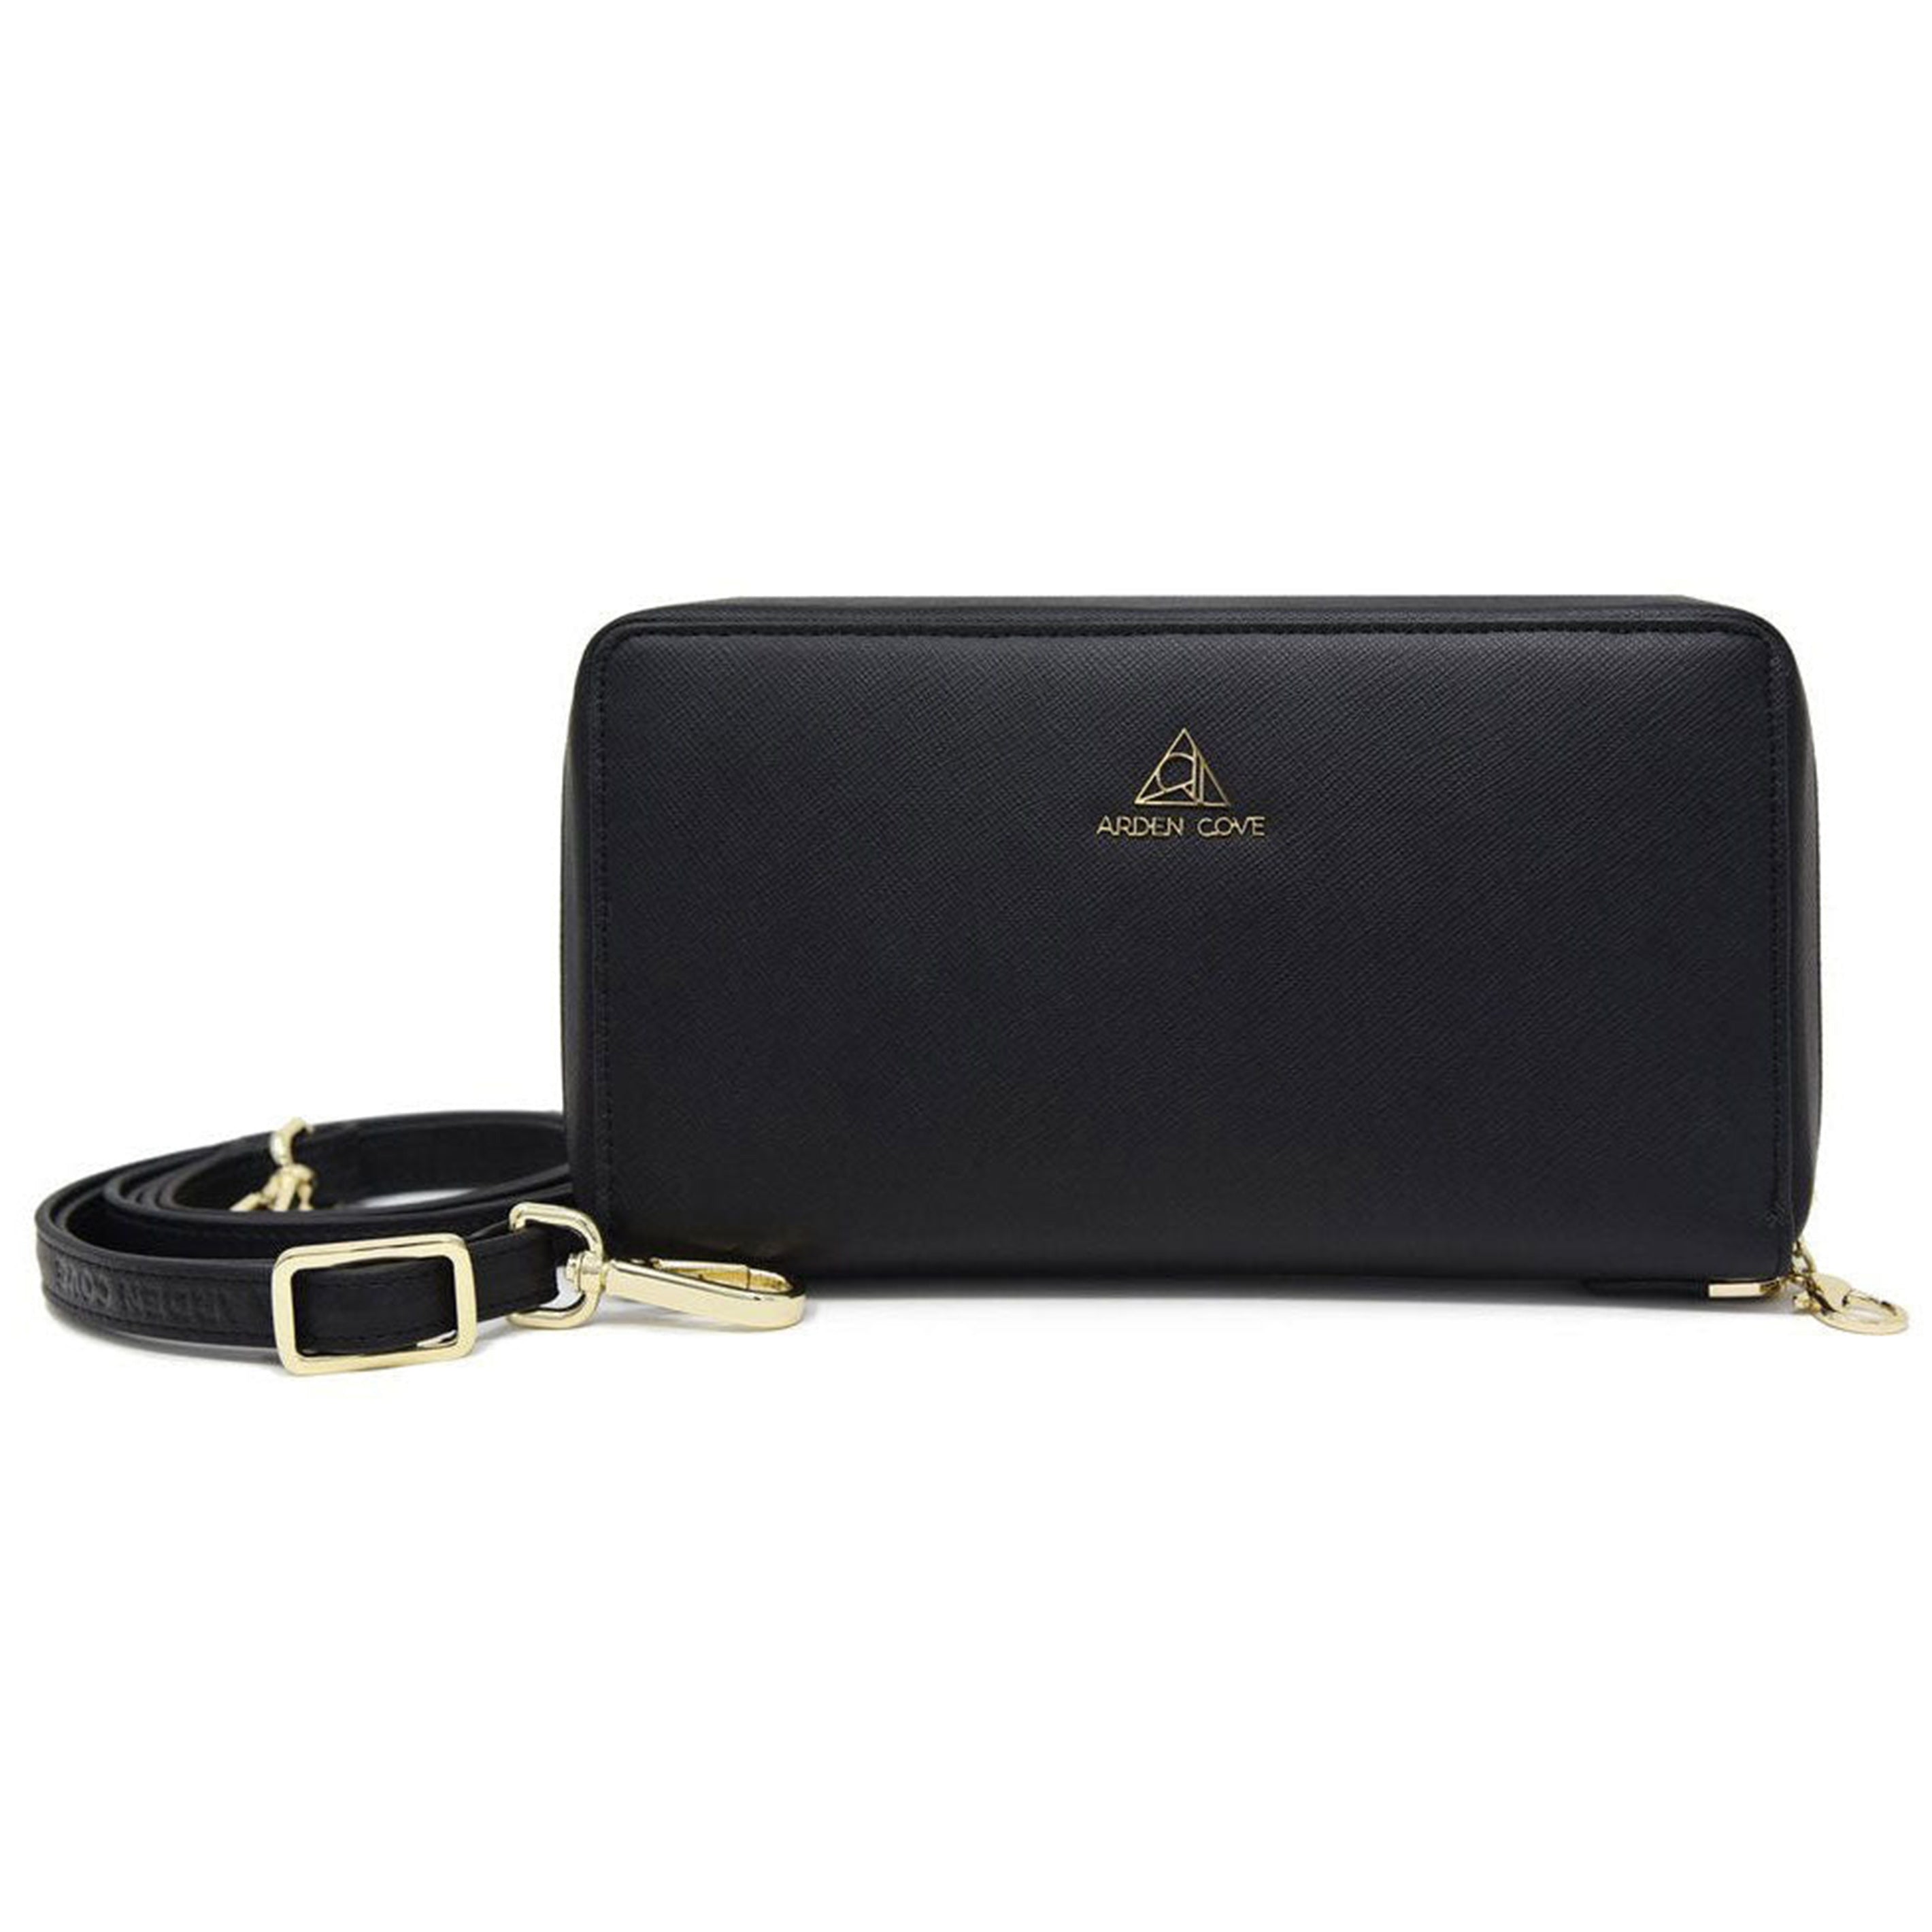 Discover Louis Vuitton Key Pouch: <BR>This practical pouch holds